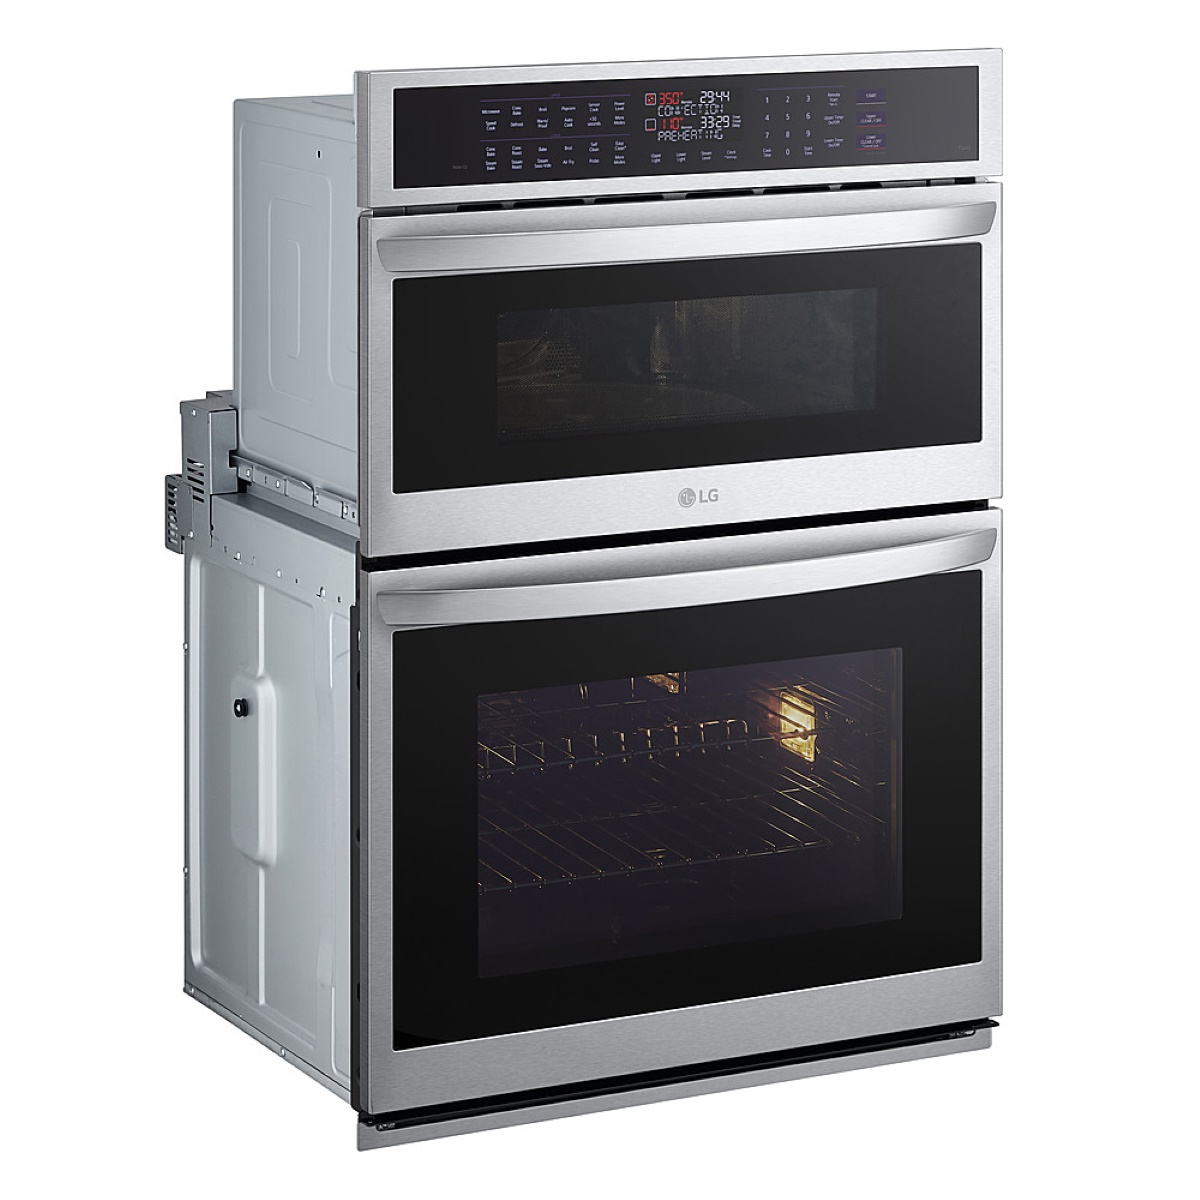 How To Fix The Error Code F-32 For LG Oven